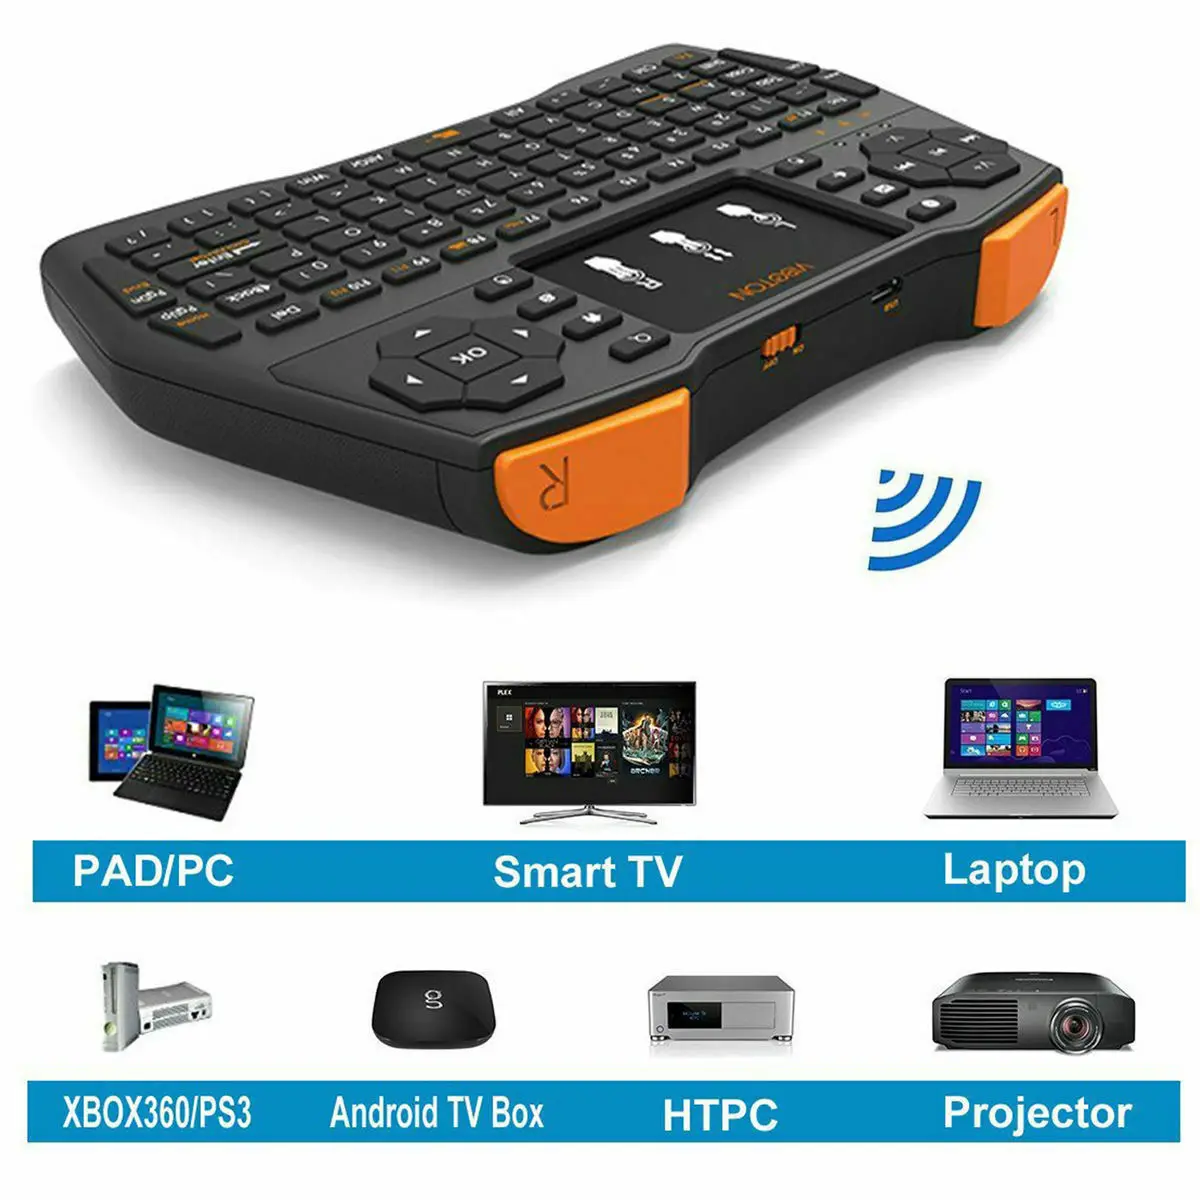 gtmedia i8x plus mini wireless keyboard 3 colors backlit ruensppt version air mouse remote touchpad for tv box gtc g5 pc mac free global shipping